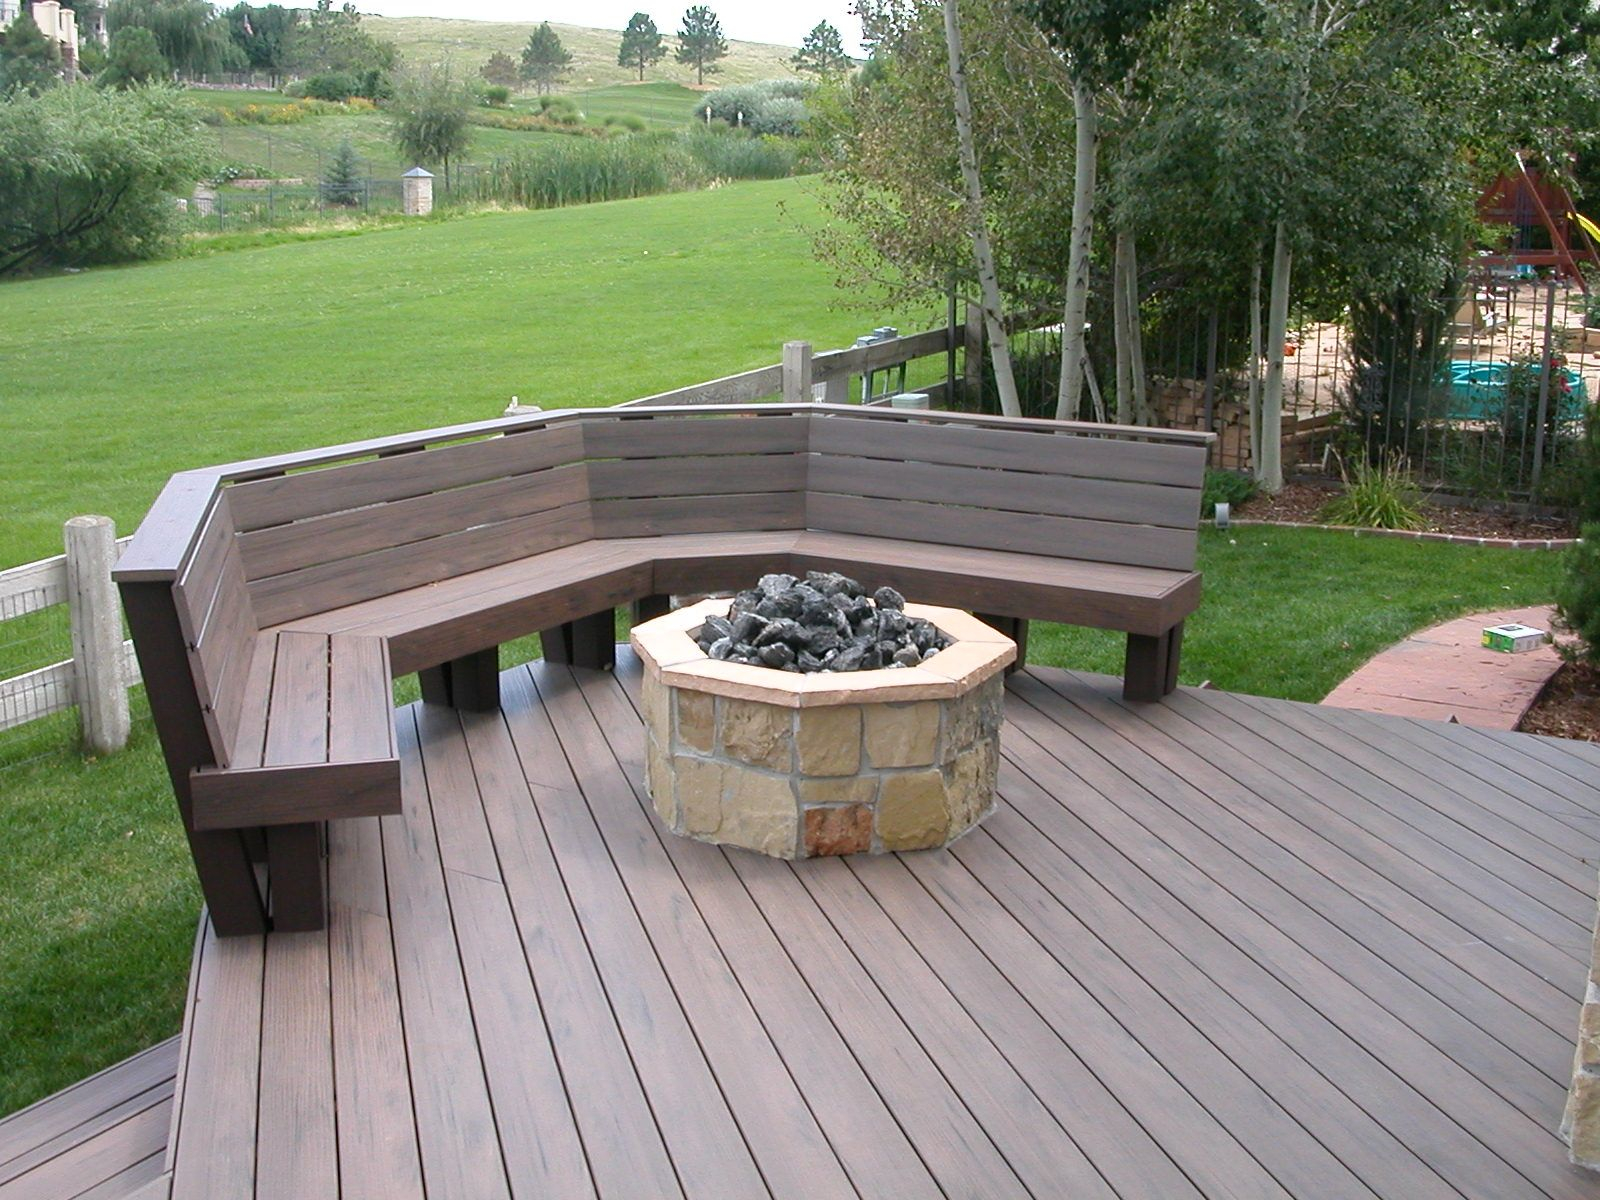 Trex Deck With Benches Fire Pit Halliday Built Decks Deck Fire within size 1600 X 1200